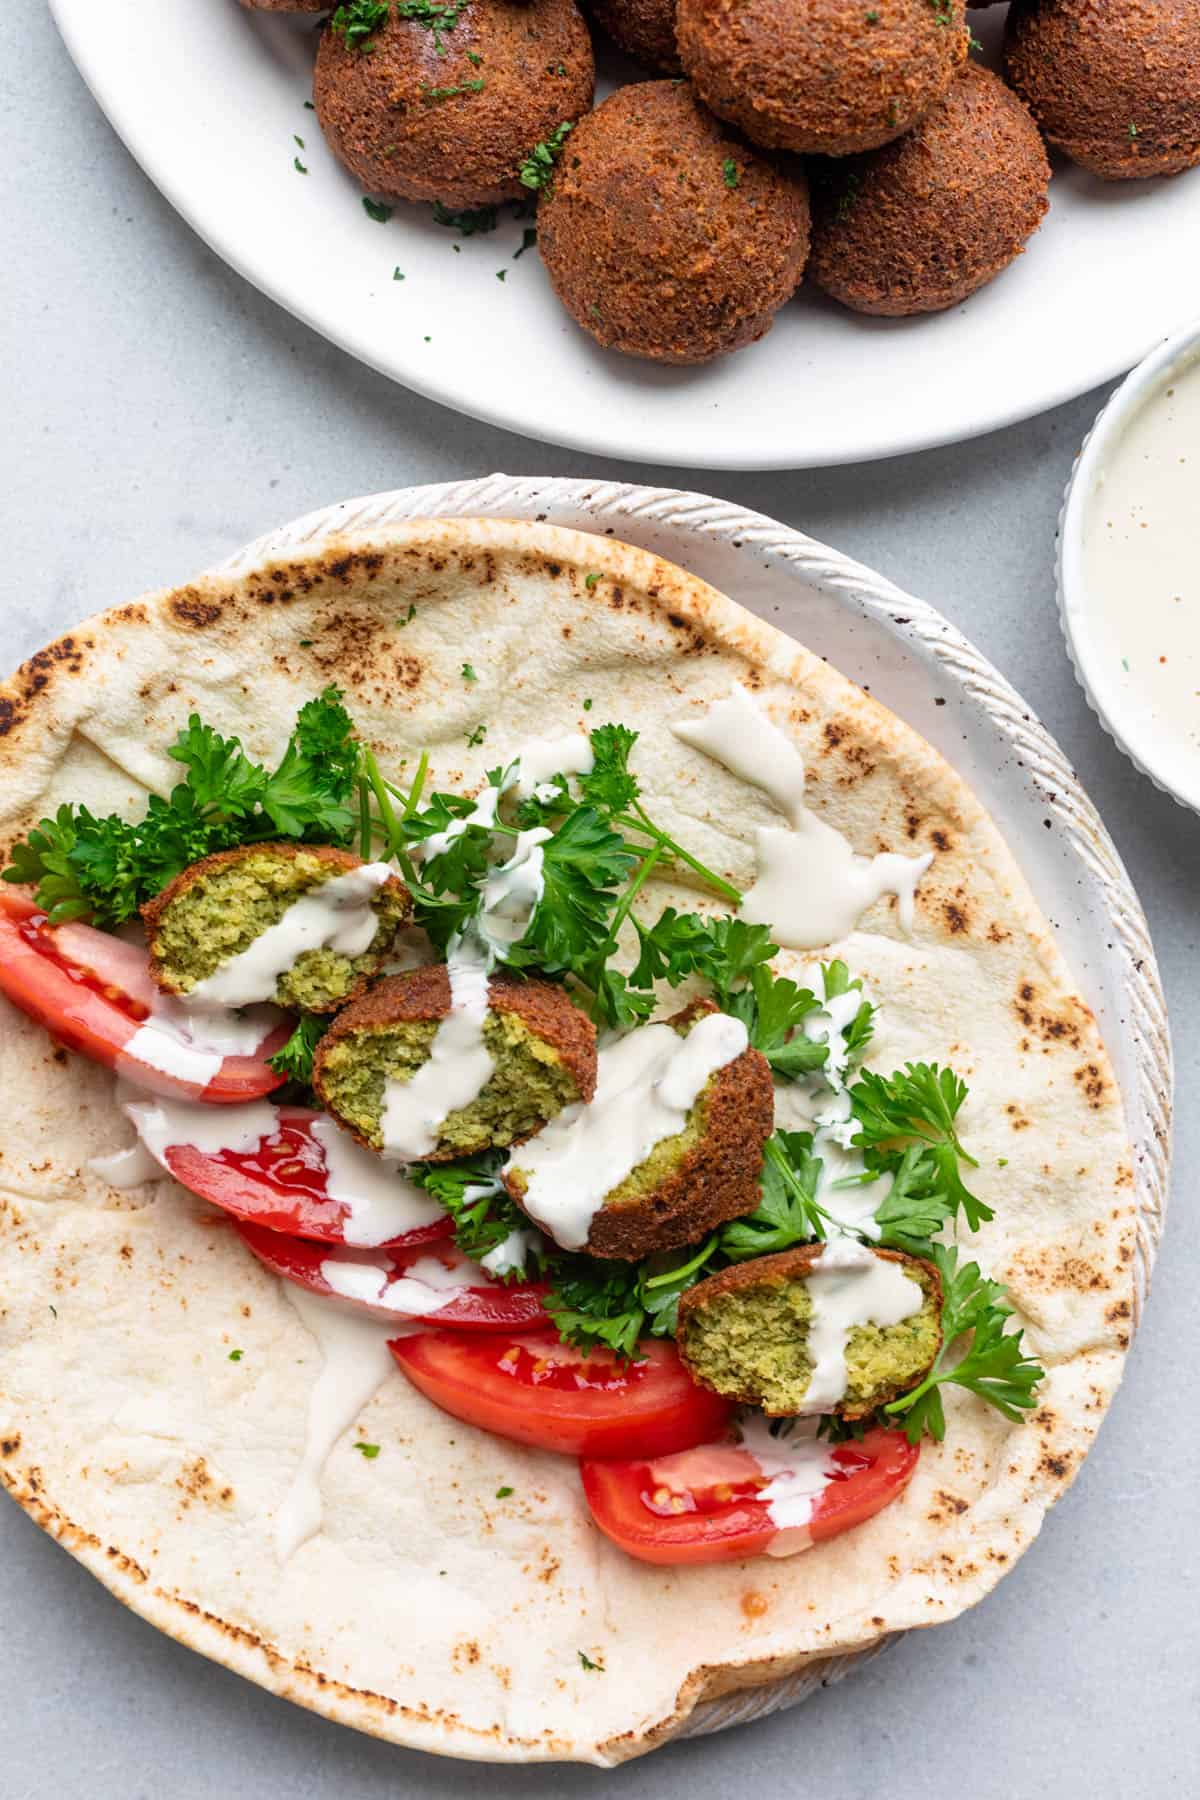 Two falafels torn in half and added to a pita with tomatoes, fresh parsley, and a drizzle of tahini sauce with plate of more falafel nearby.